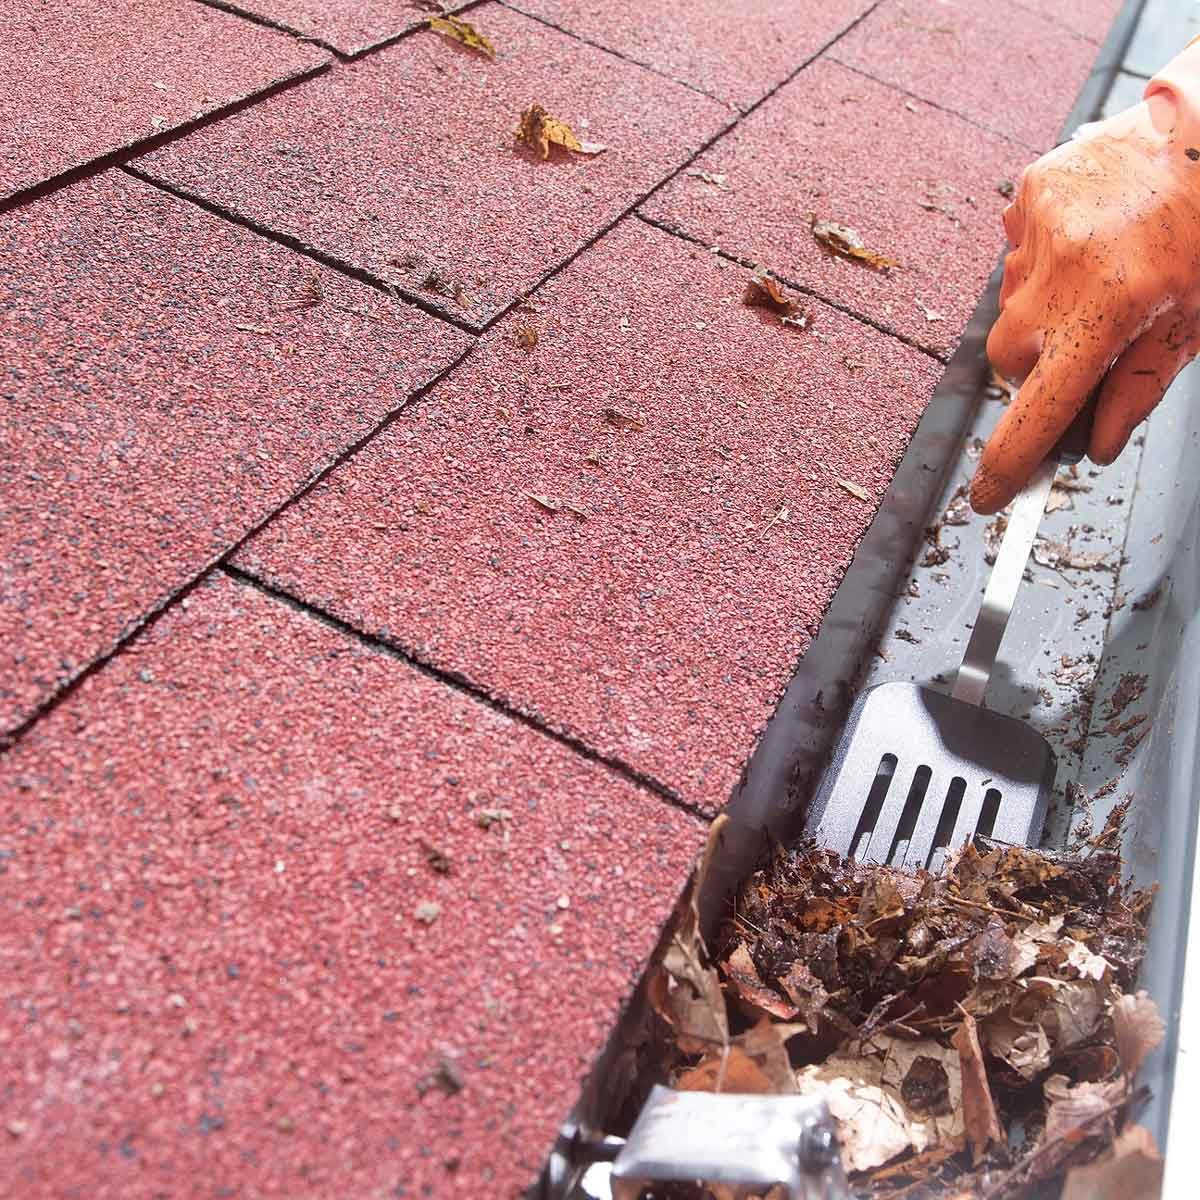 Easier gutter cleaning with a spatula